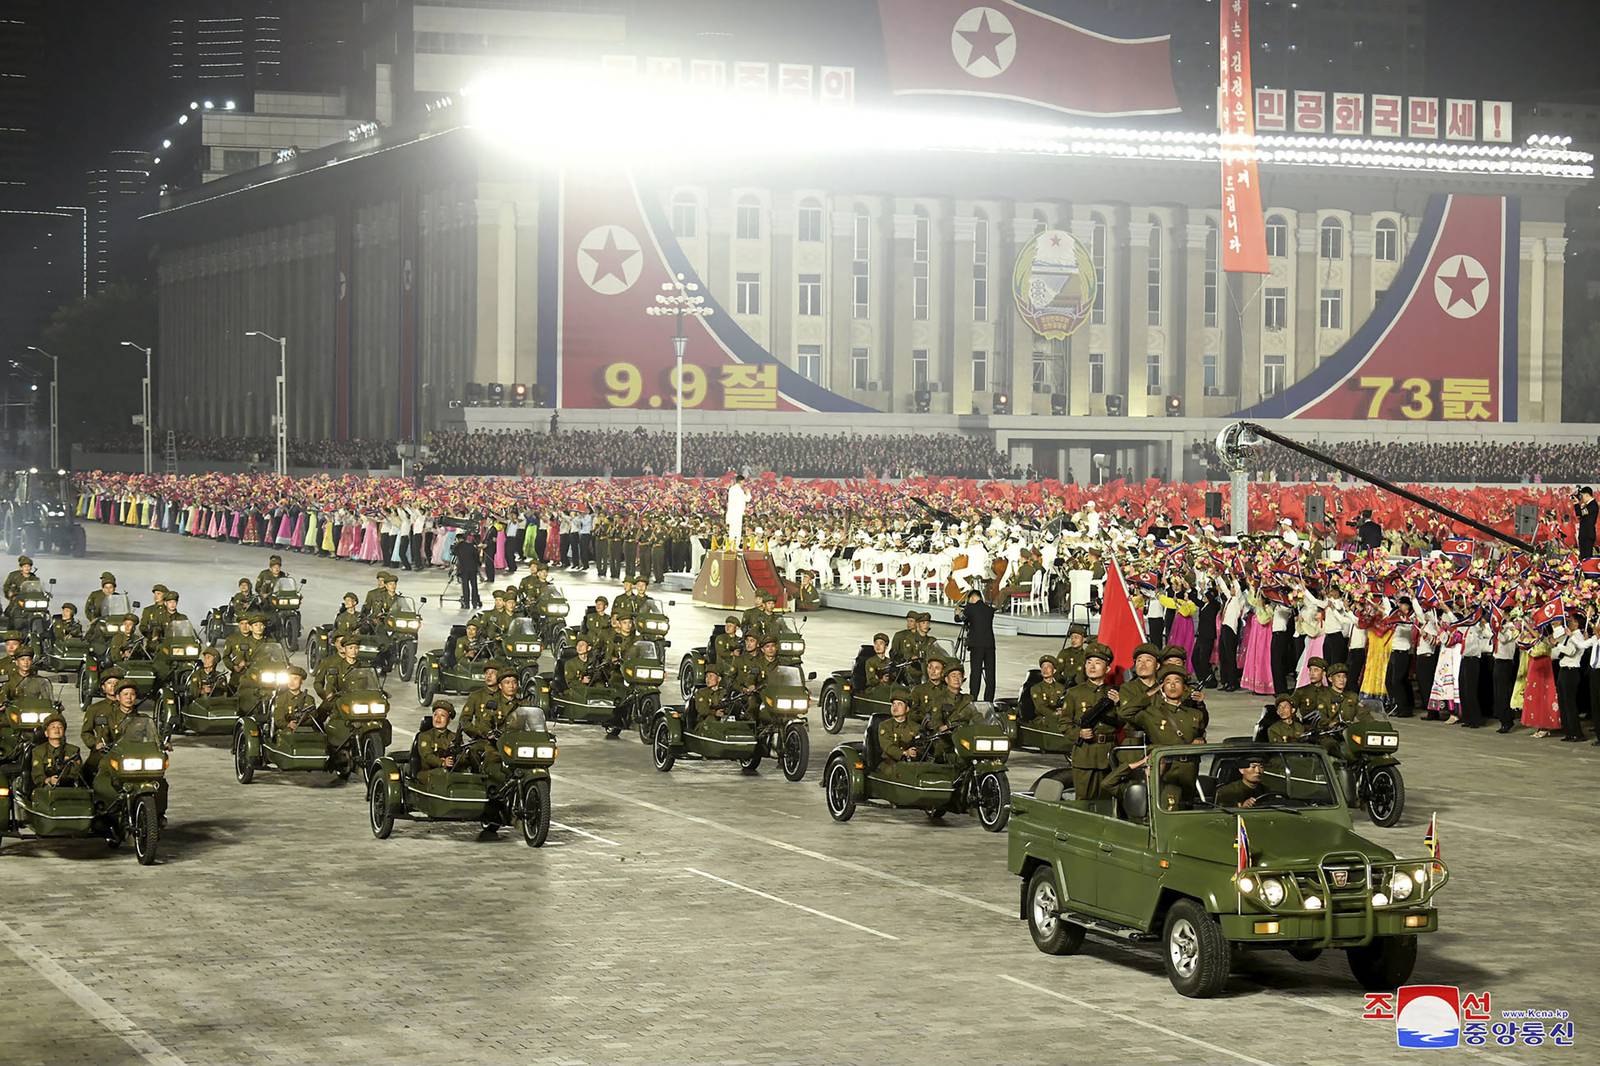 See Video And Images From North Koreas Latest Military Parade